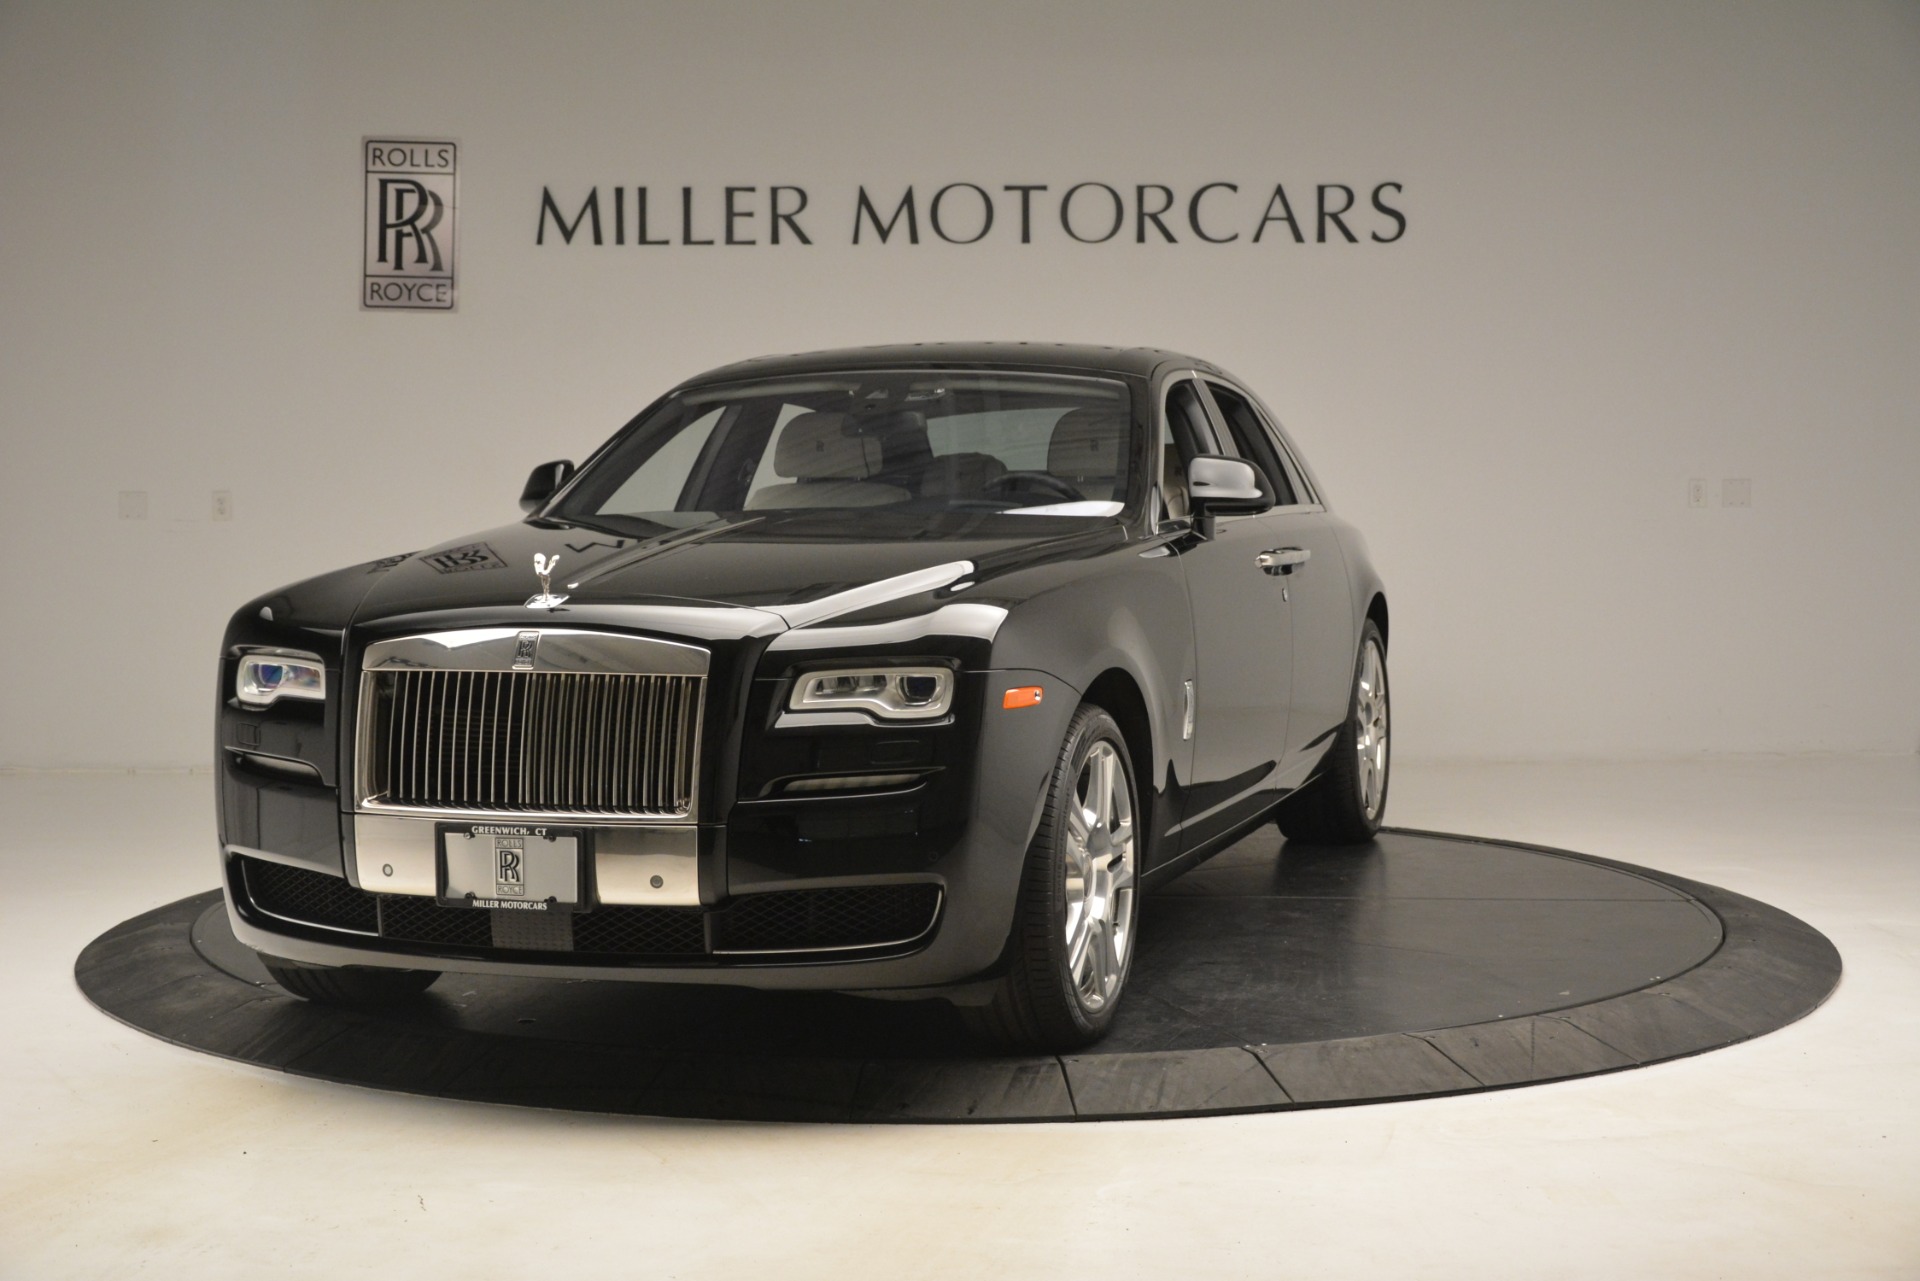 Used 2016 Rolls-Royce Ghost for sale Sold at Aston Martin of Greenwich in Greenwich CT 06830 1